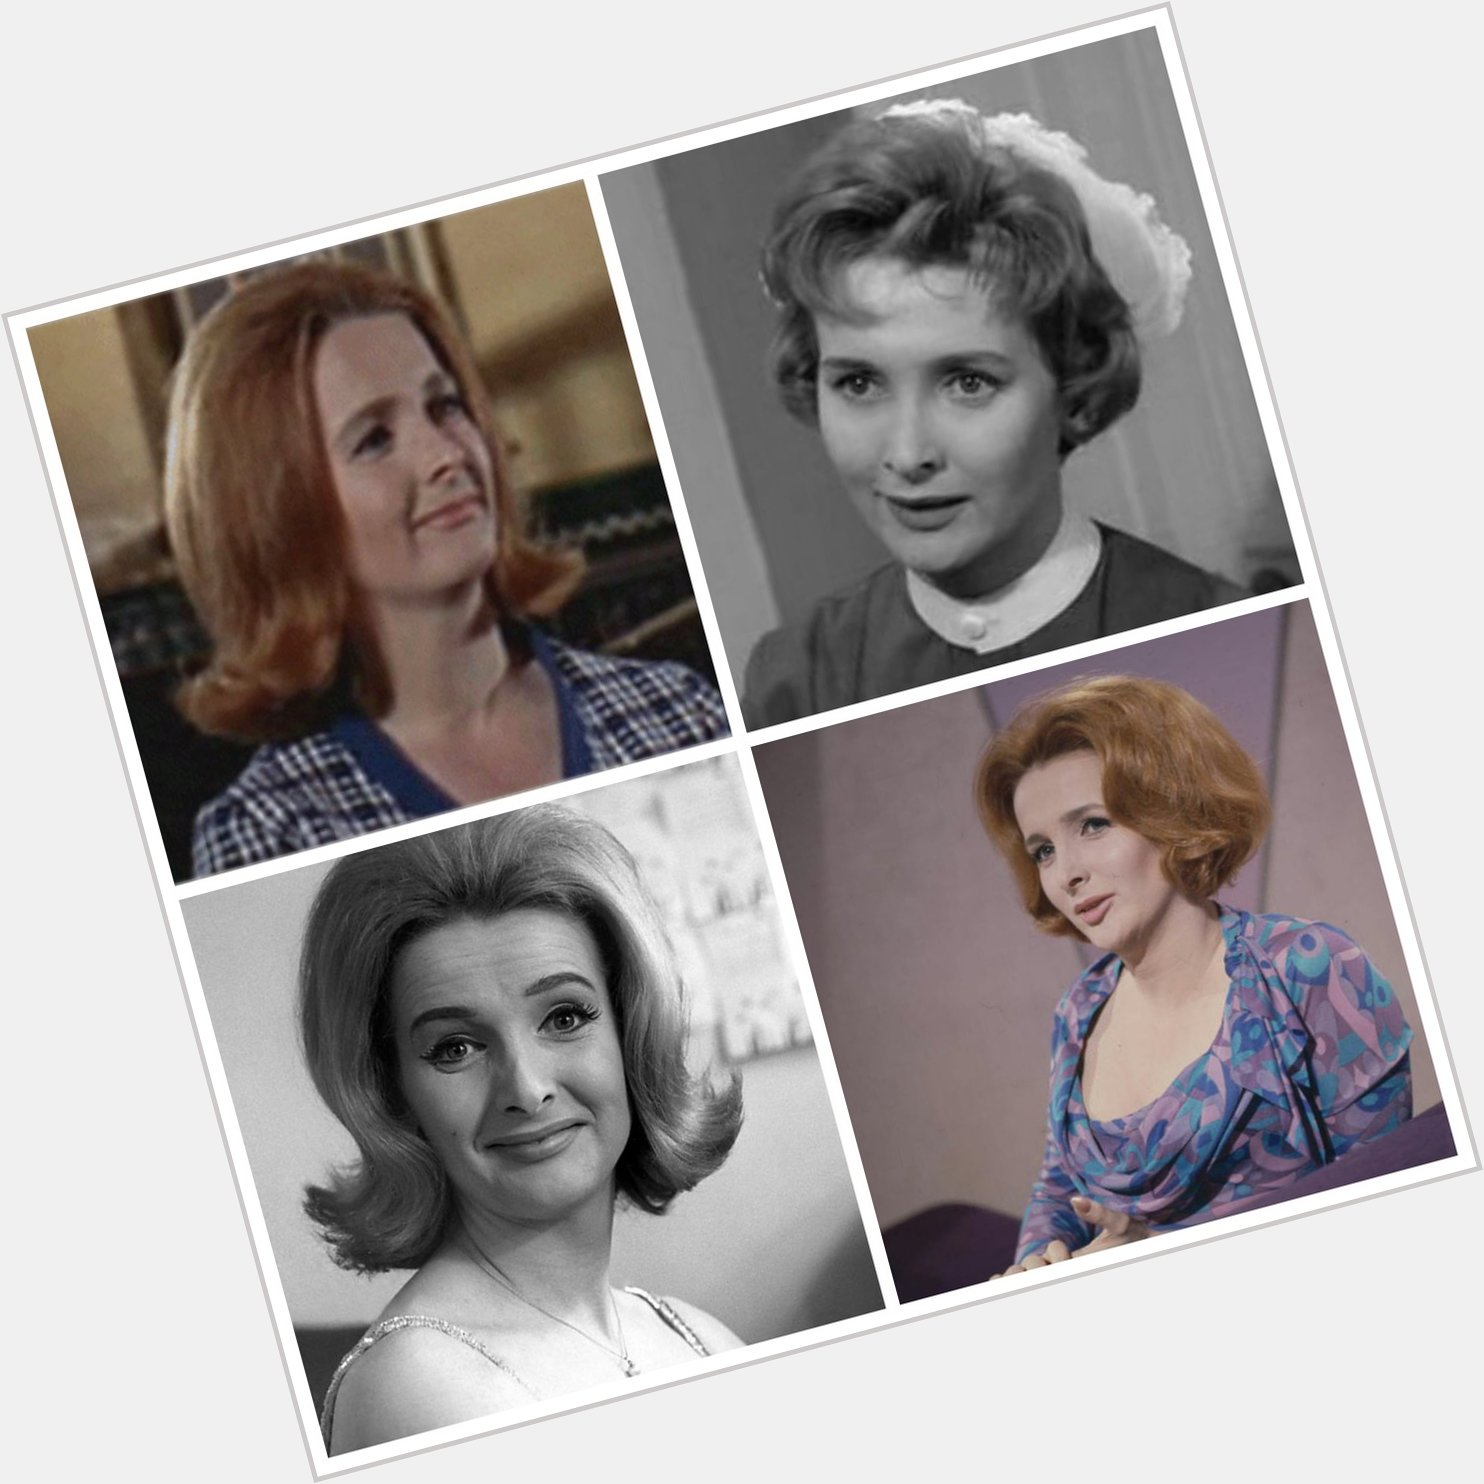 Millicent Martin is 83 today, Happy Birthday Millicent! 